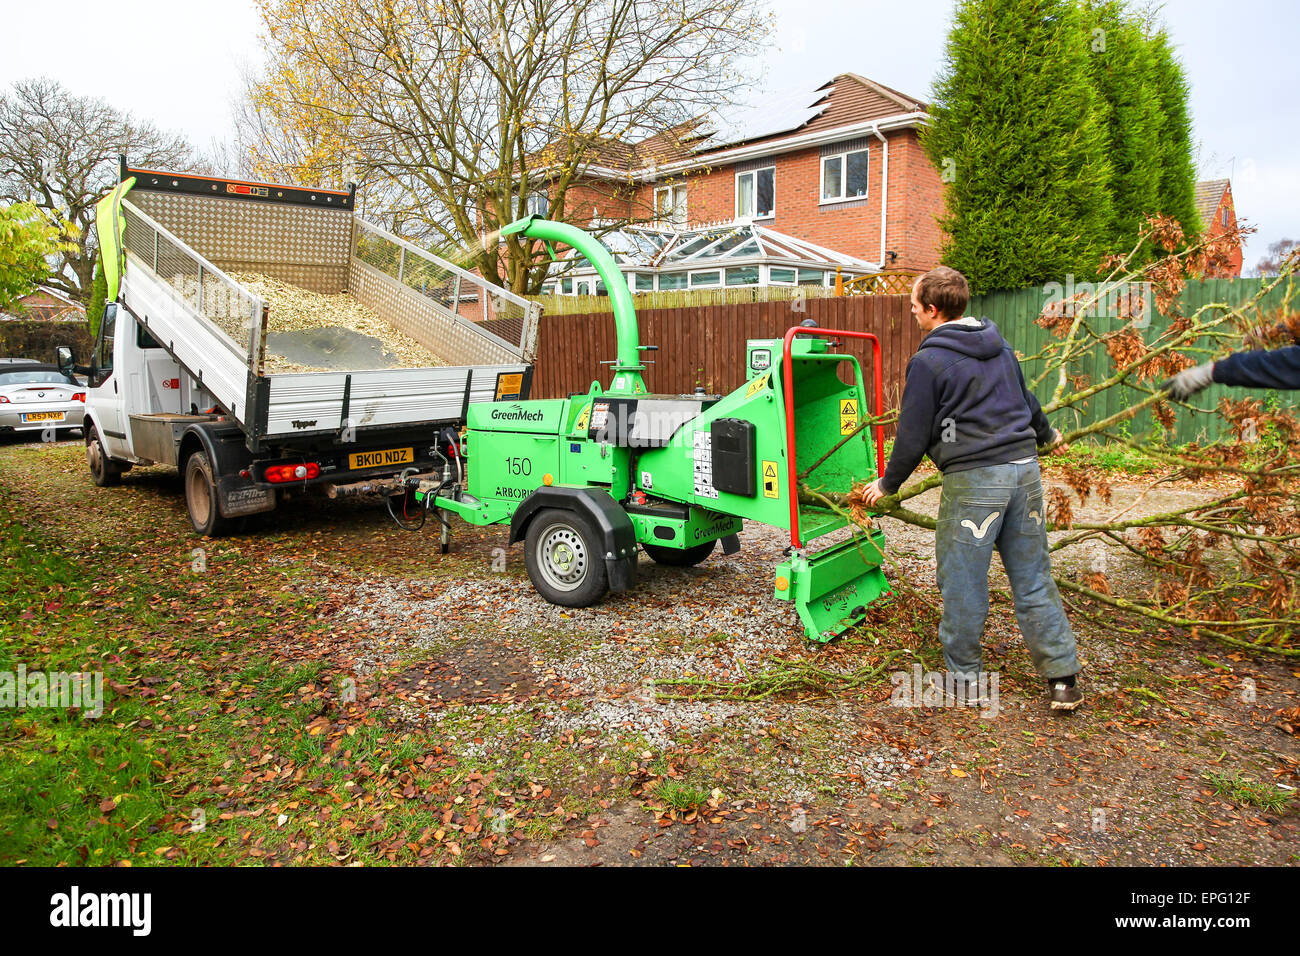 A GreenMech Arborist 150 Wood Chipper fitted to the back of a truck Stock Photo